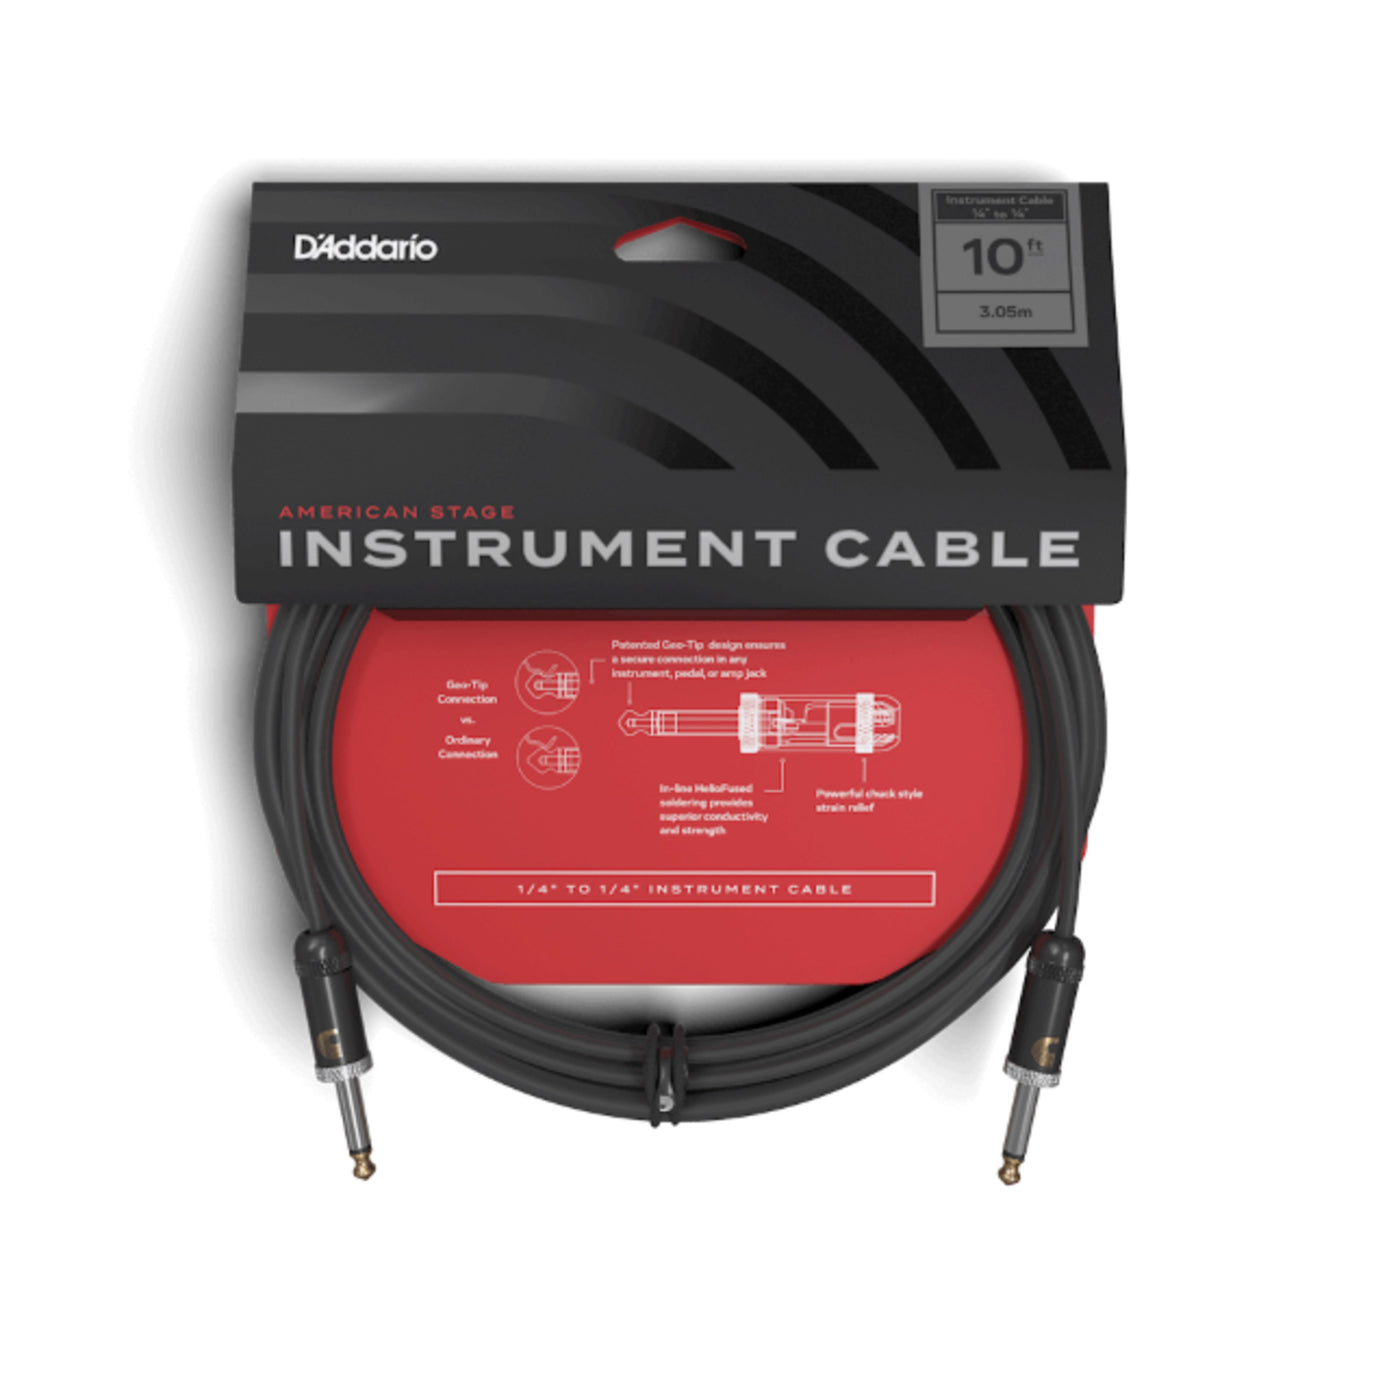 D'Addario American Stage Instrument Cable, 20 feet (PW-AMSG-20)